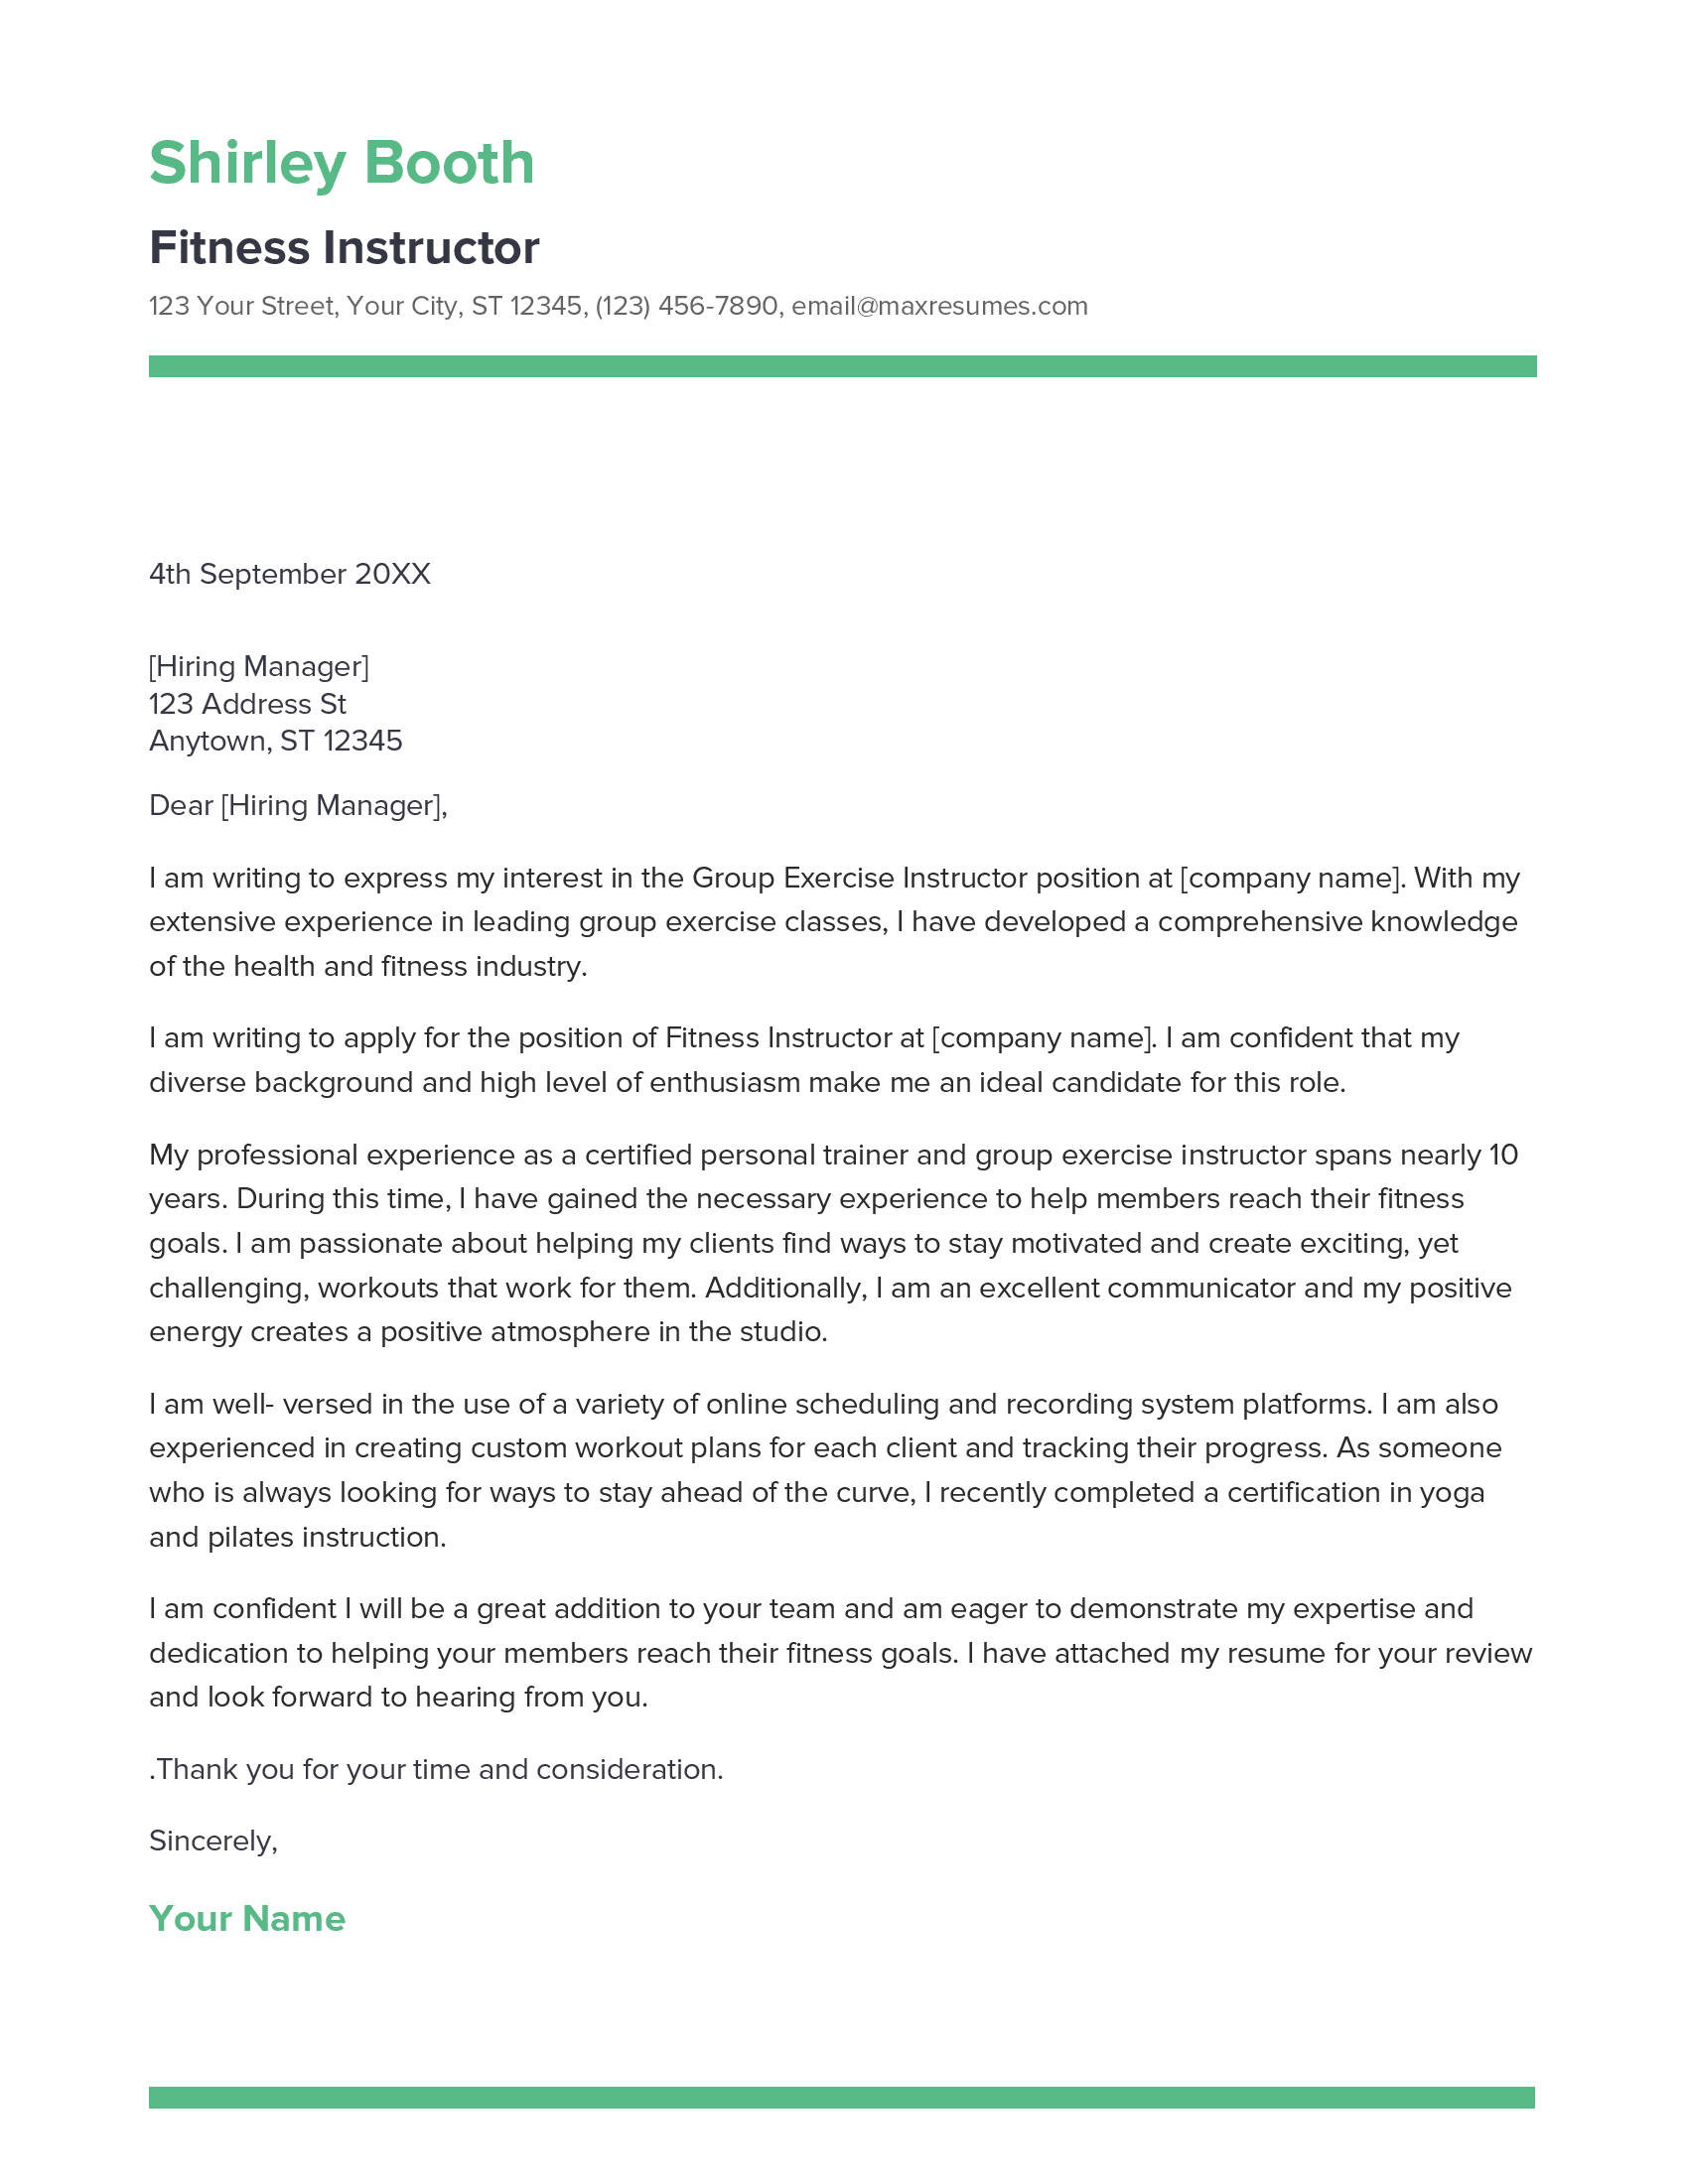 Fitness Instructor Cover Letter Example